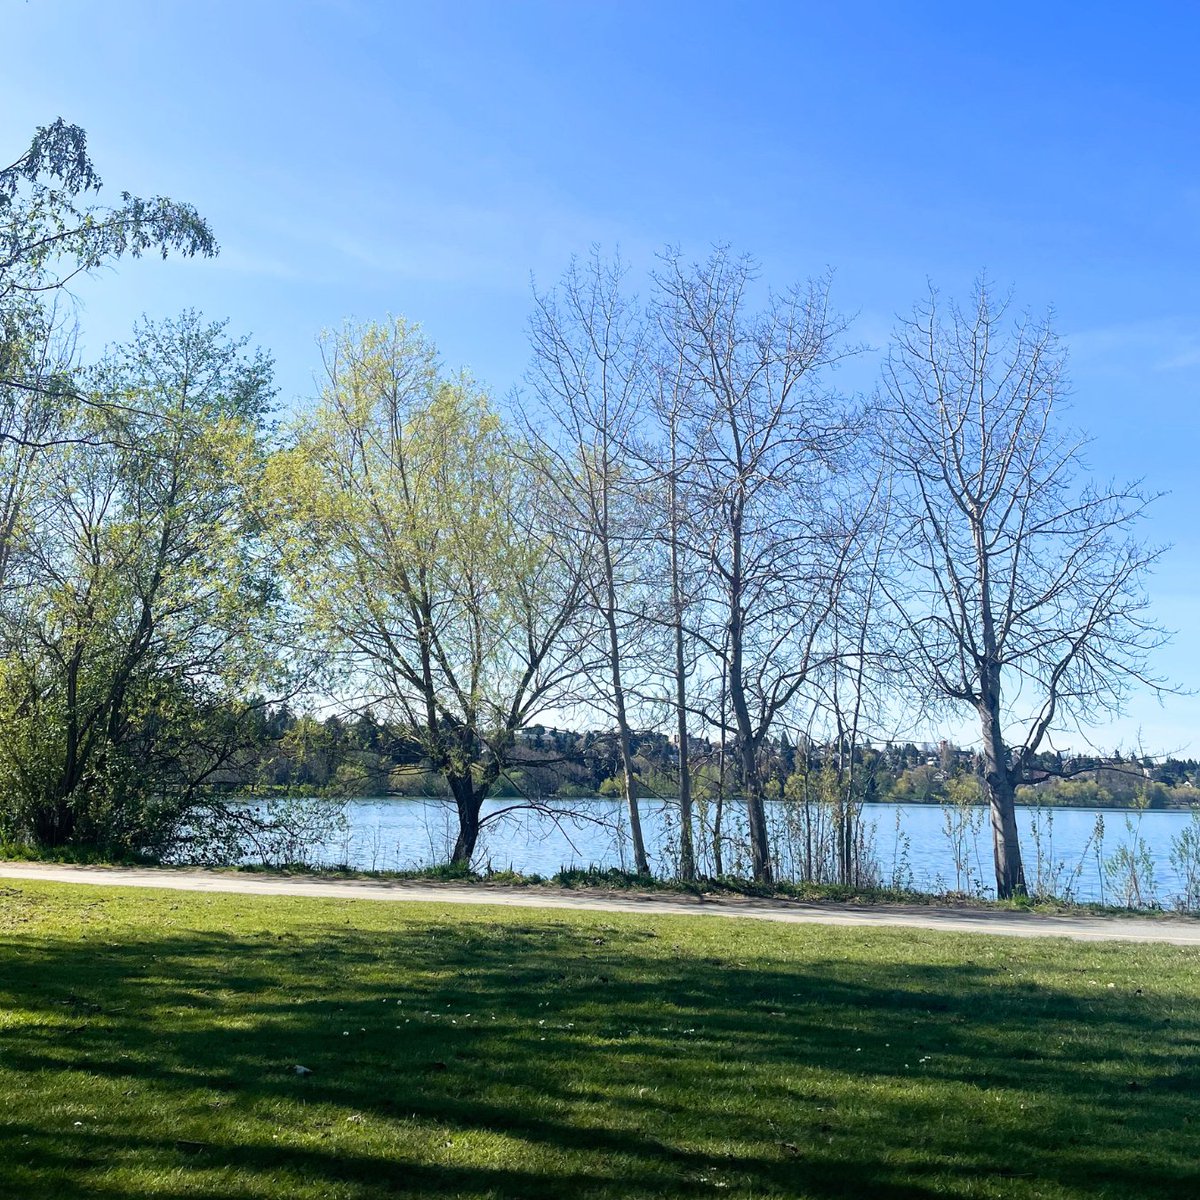 One of the things we absolutely love doing when the weather warms up is heading to Greenlake in Seattle for a leisurely walk around the loop and a fun picnic with friends! Have you ever been to Greenlake before?  Let us know below!